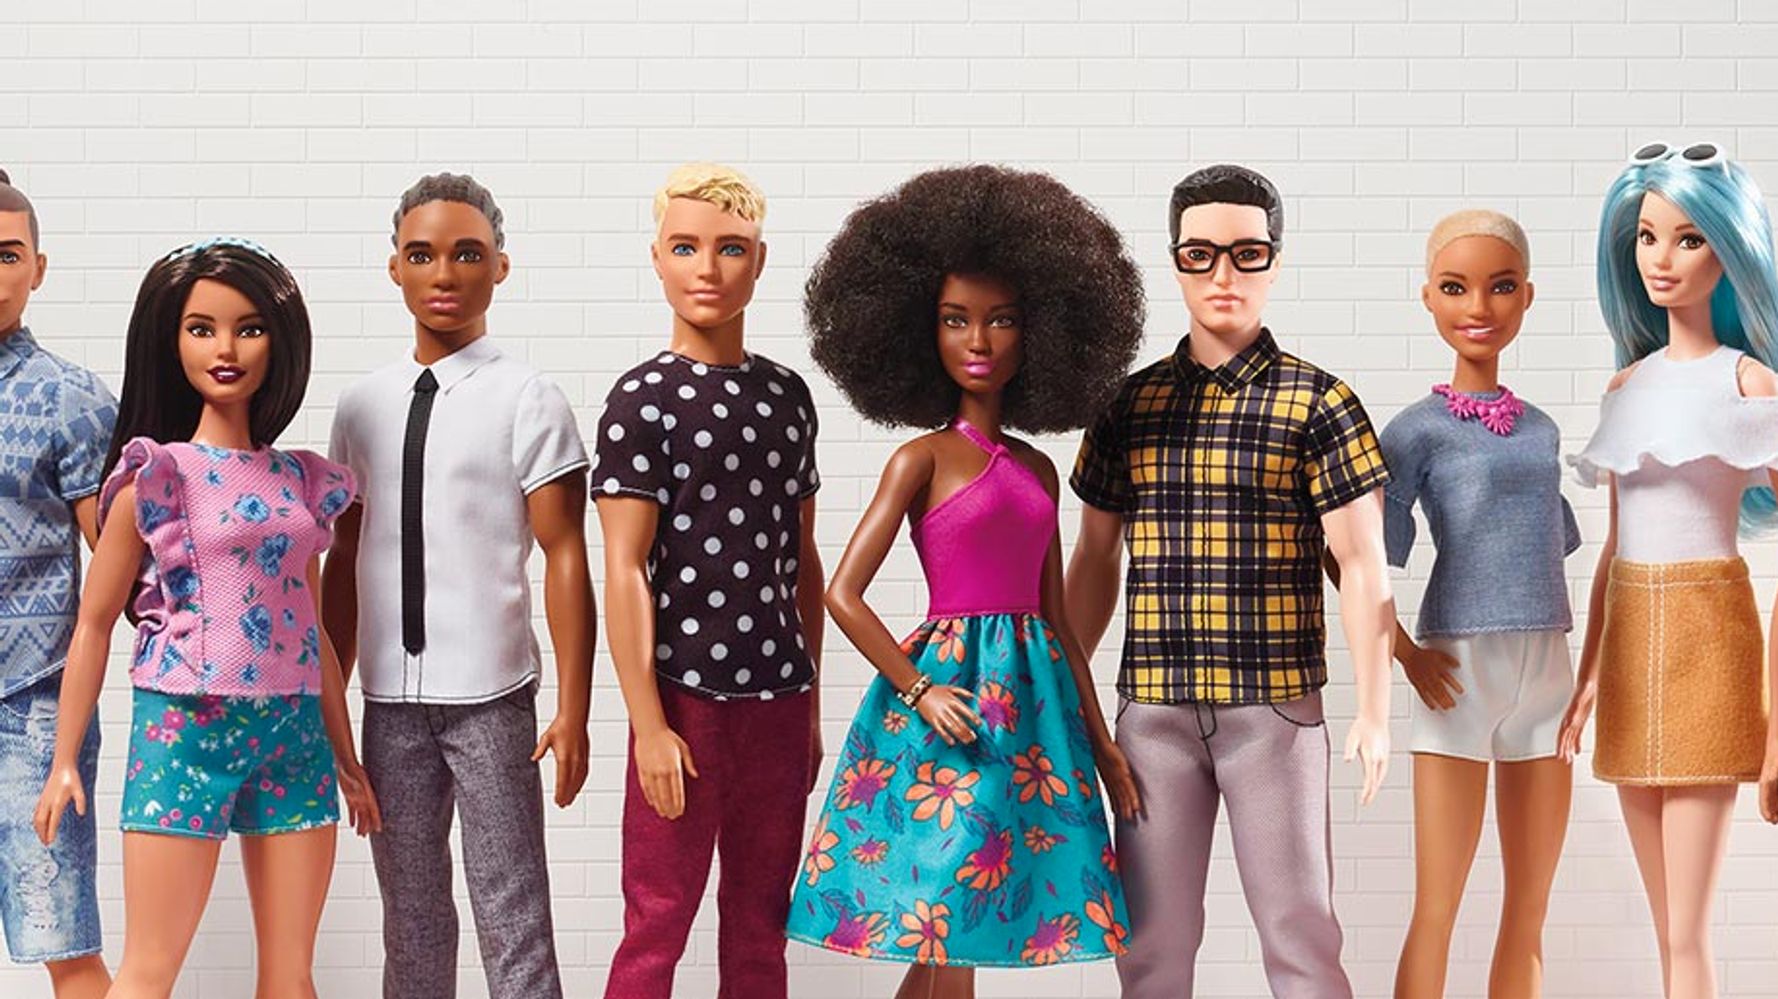 40 New Barbie And Ken Dolls Launched By Mattel With Different Body 